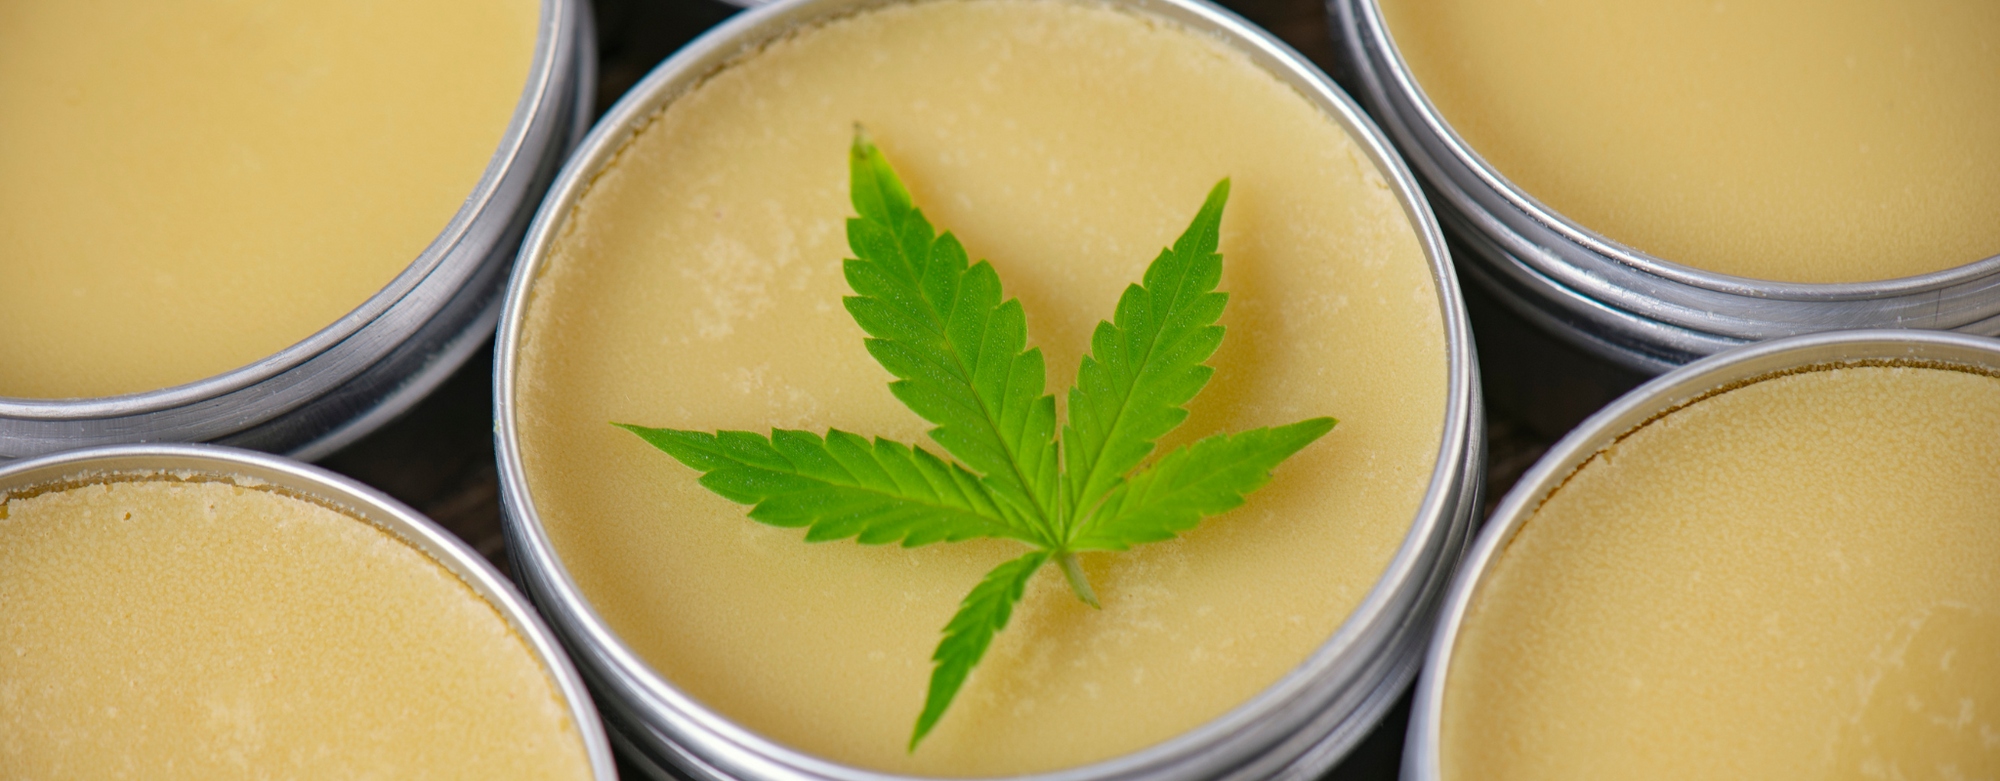 Close up of the CBD salve in its container with a beautiful leaf aspect.  